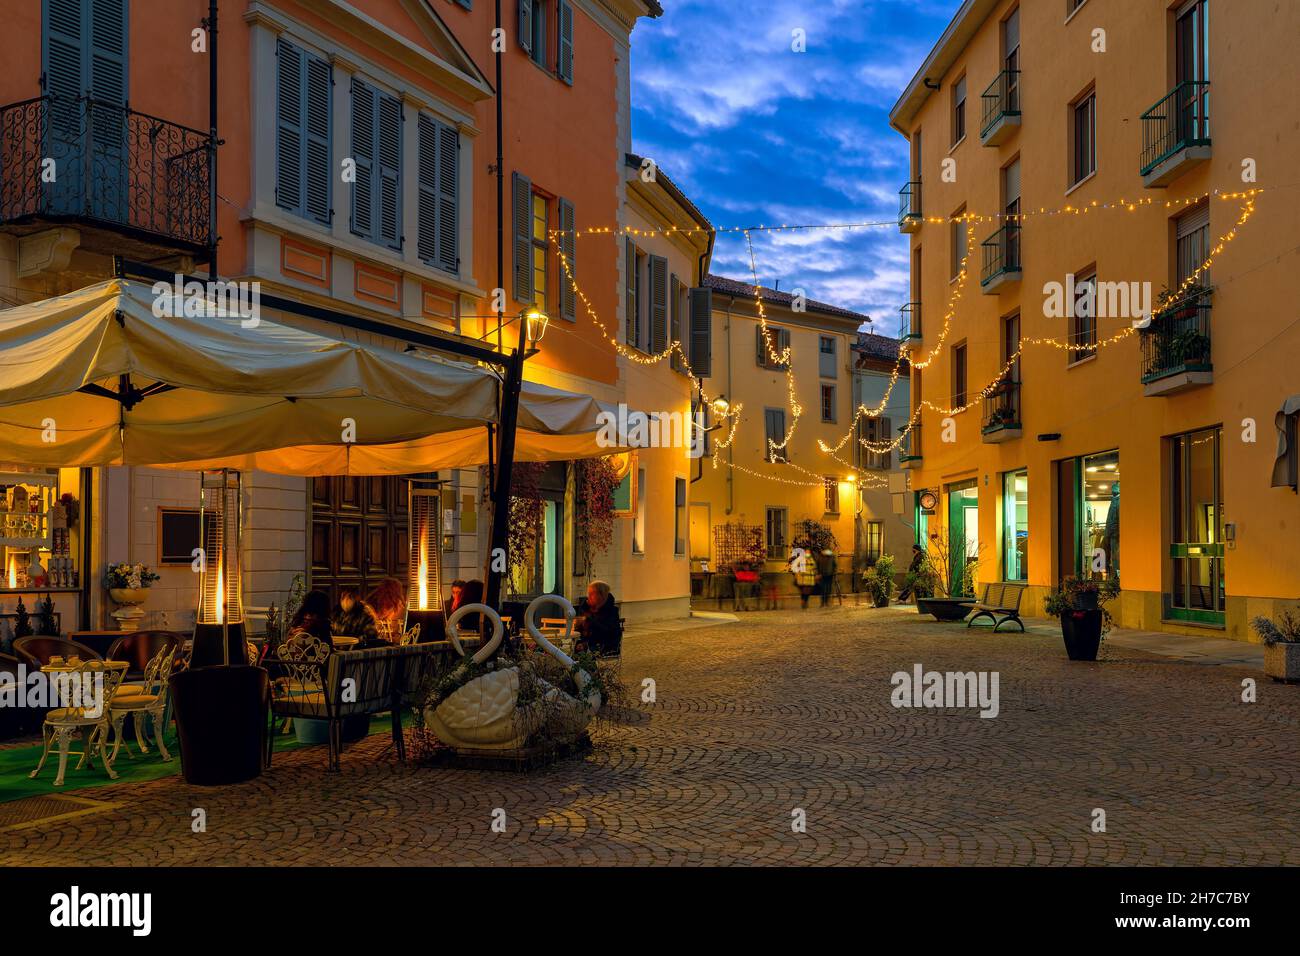 Outdoor restaurant on small cobblestone town square illuminated with Christmas lights in the evening in Alba, Piedmont, Northern Italy. Stock Photo